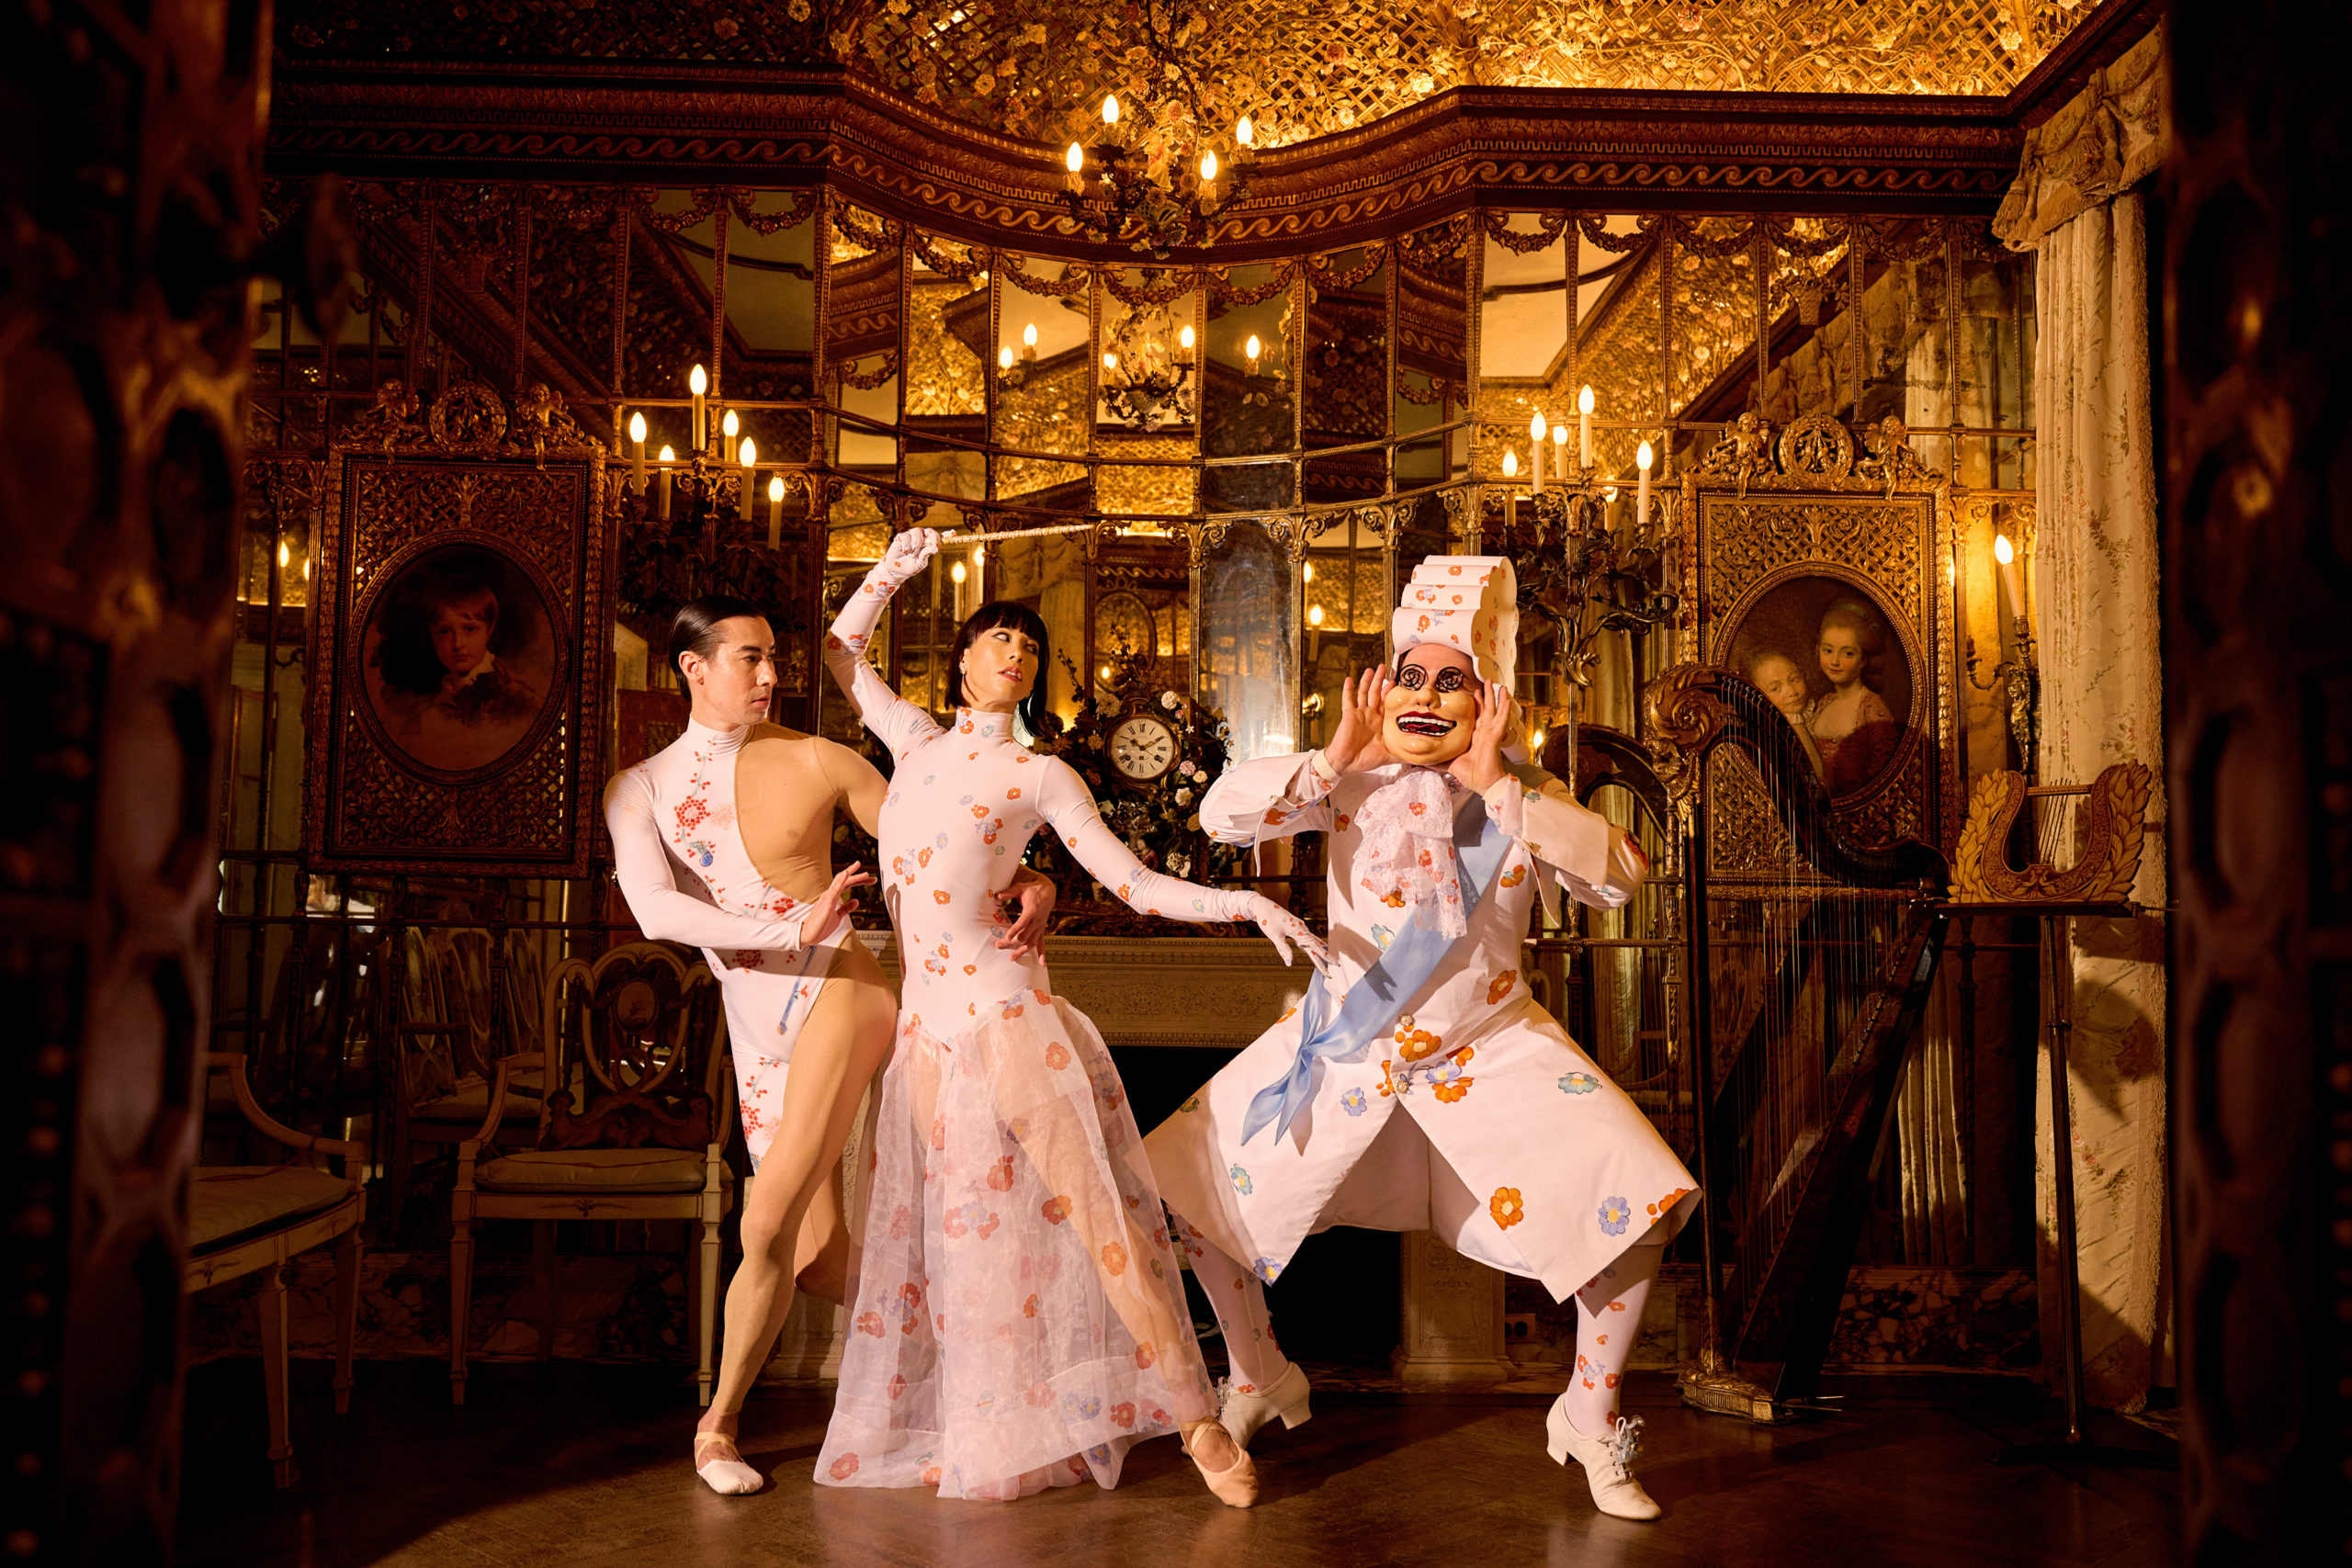 In an ornate, gilded room full of mirrors, Daniel Appelbaum, Georgina Pazcoguin and Tyler Haynes pose in floral-patterned costumes for Ballet des Porcelaines. Hanes wears a mask with a large, exaggerated smile and a tall hat.